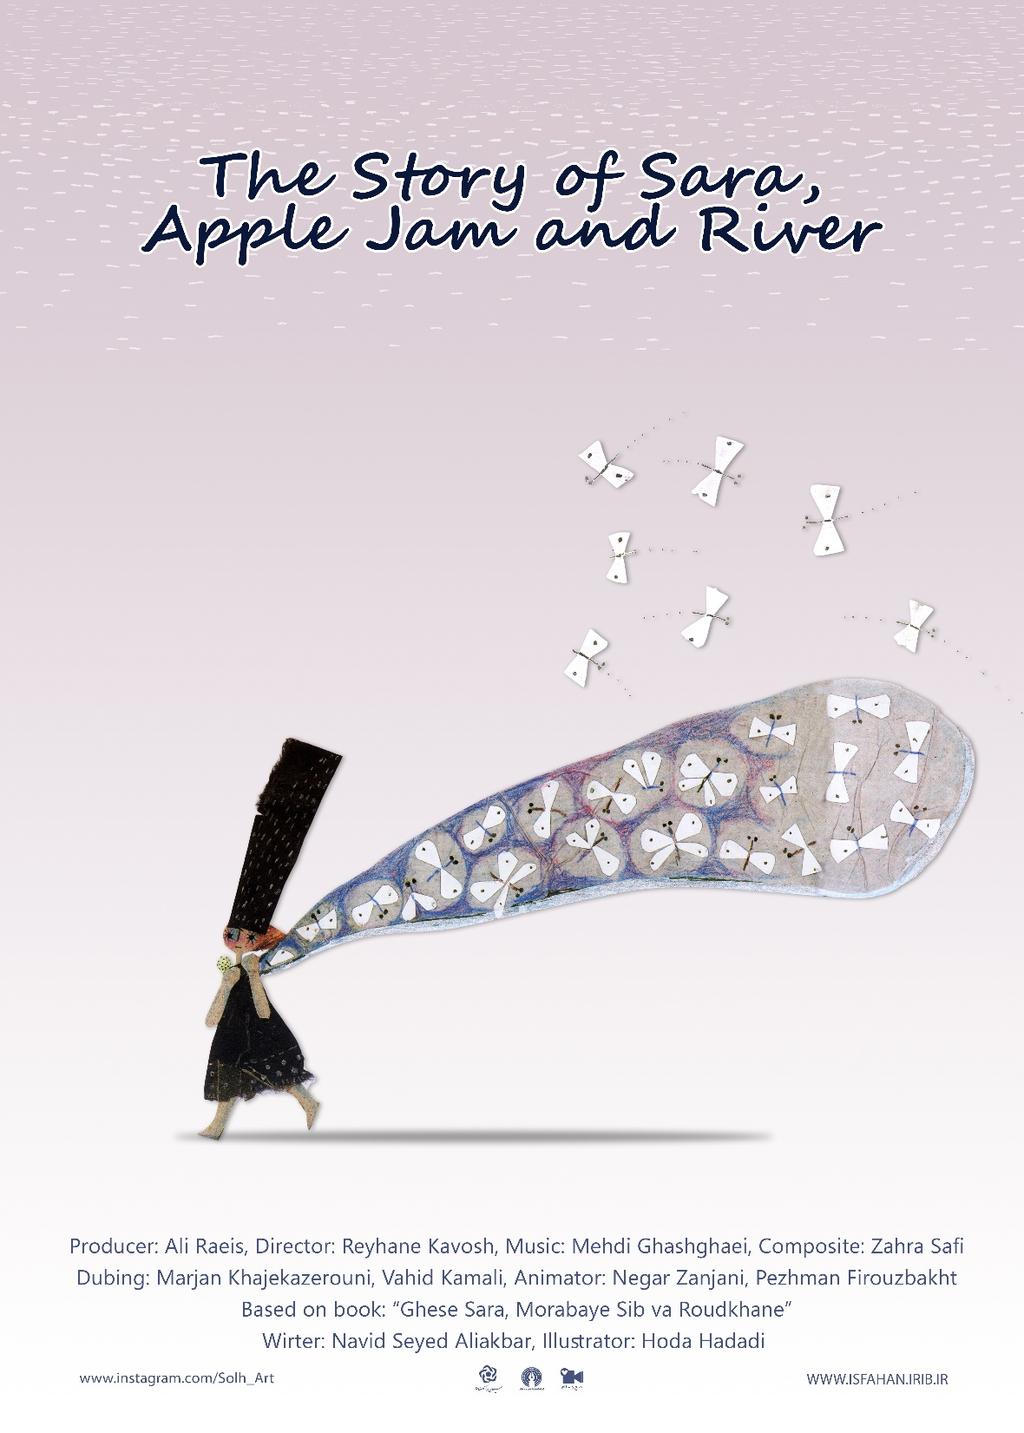 6. The Story of Sara, Apple Jam and River Synopsis: Sara is born is a beautiful forest.